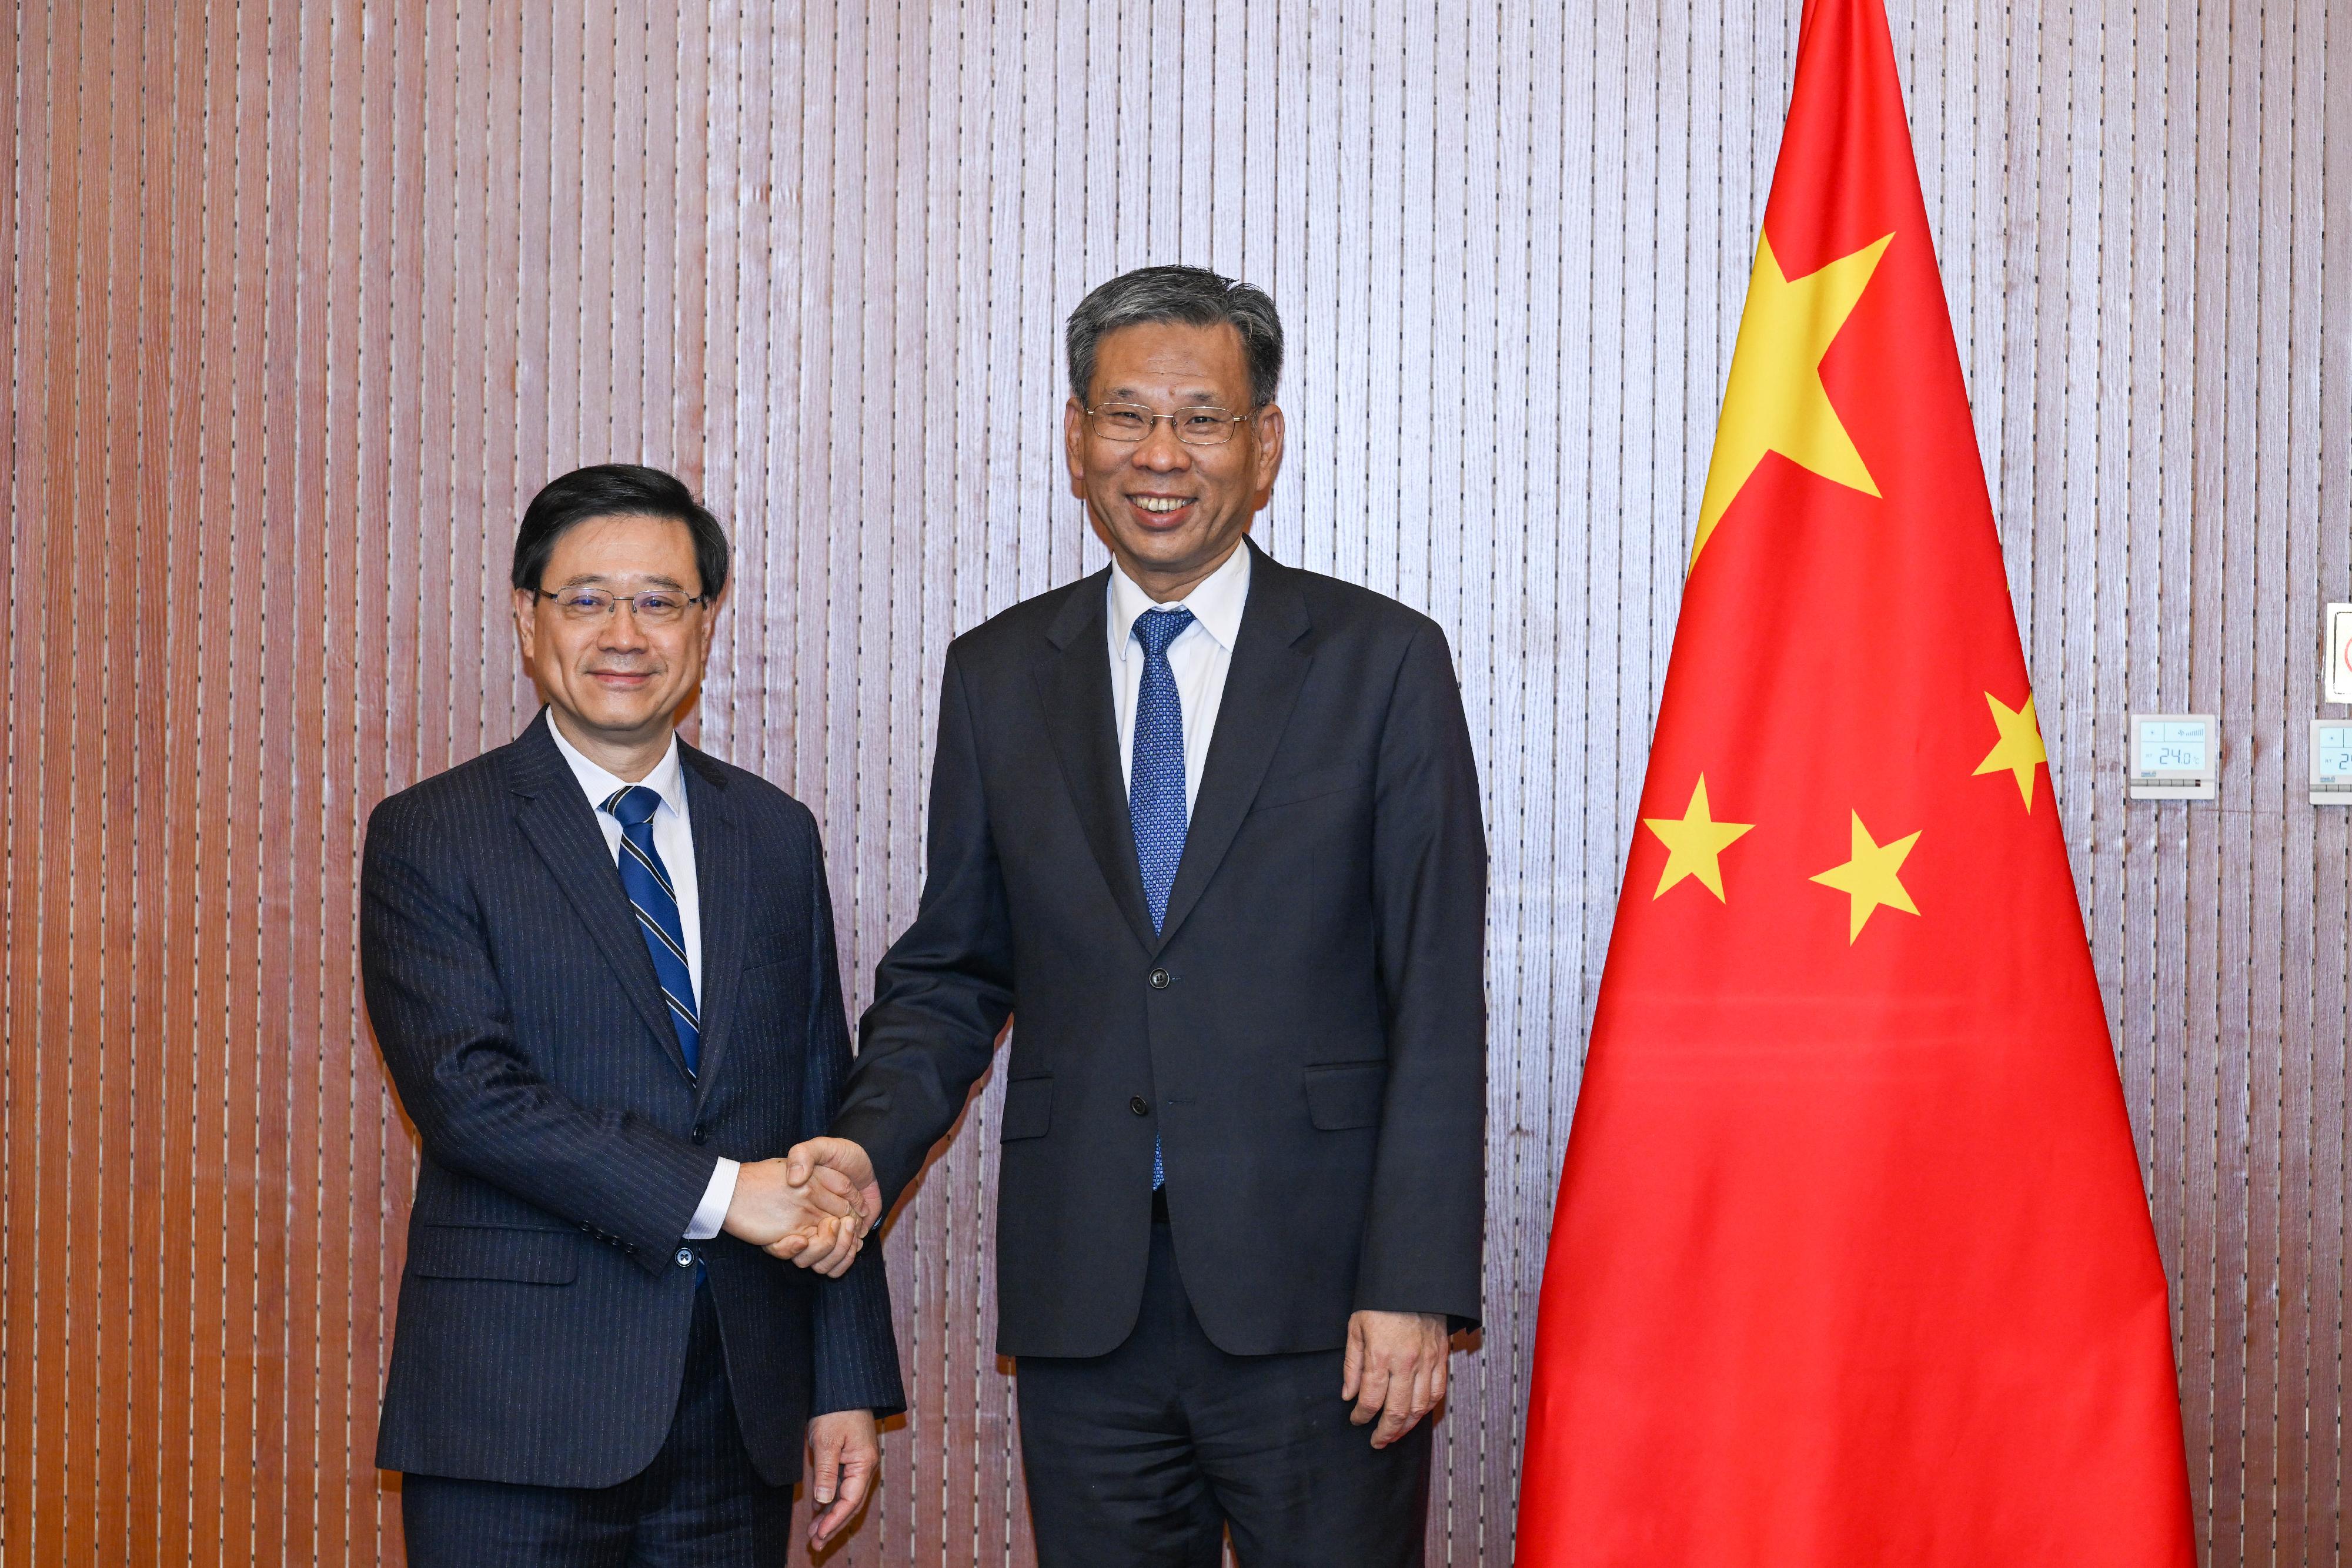 The Chief Executive, Mr John Lee (left), meets with the Minister of Finance, Mr Liu Kun
(right), in Beijing this morning (March 14).